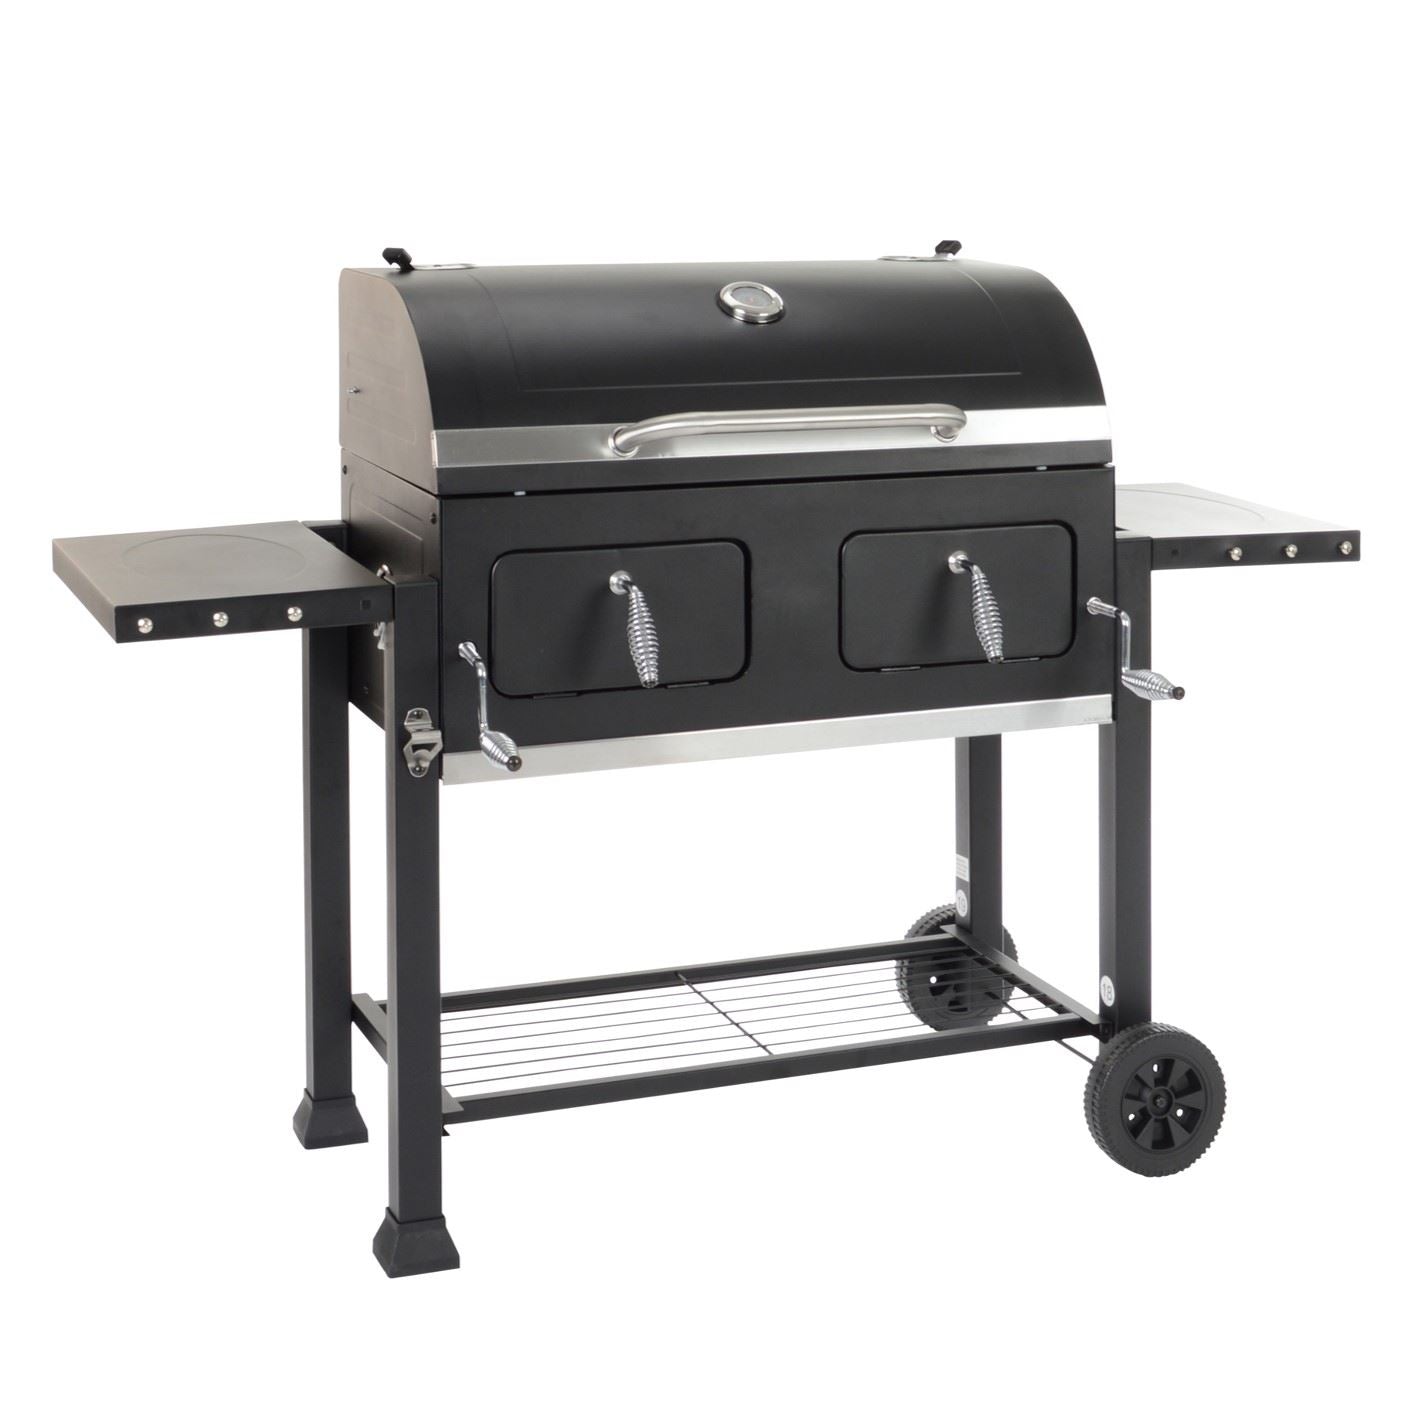 XXL Broiler Charcoal BBQ (Cast-Iron Grill) & Weatherproof cover